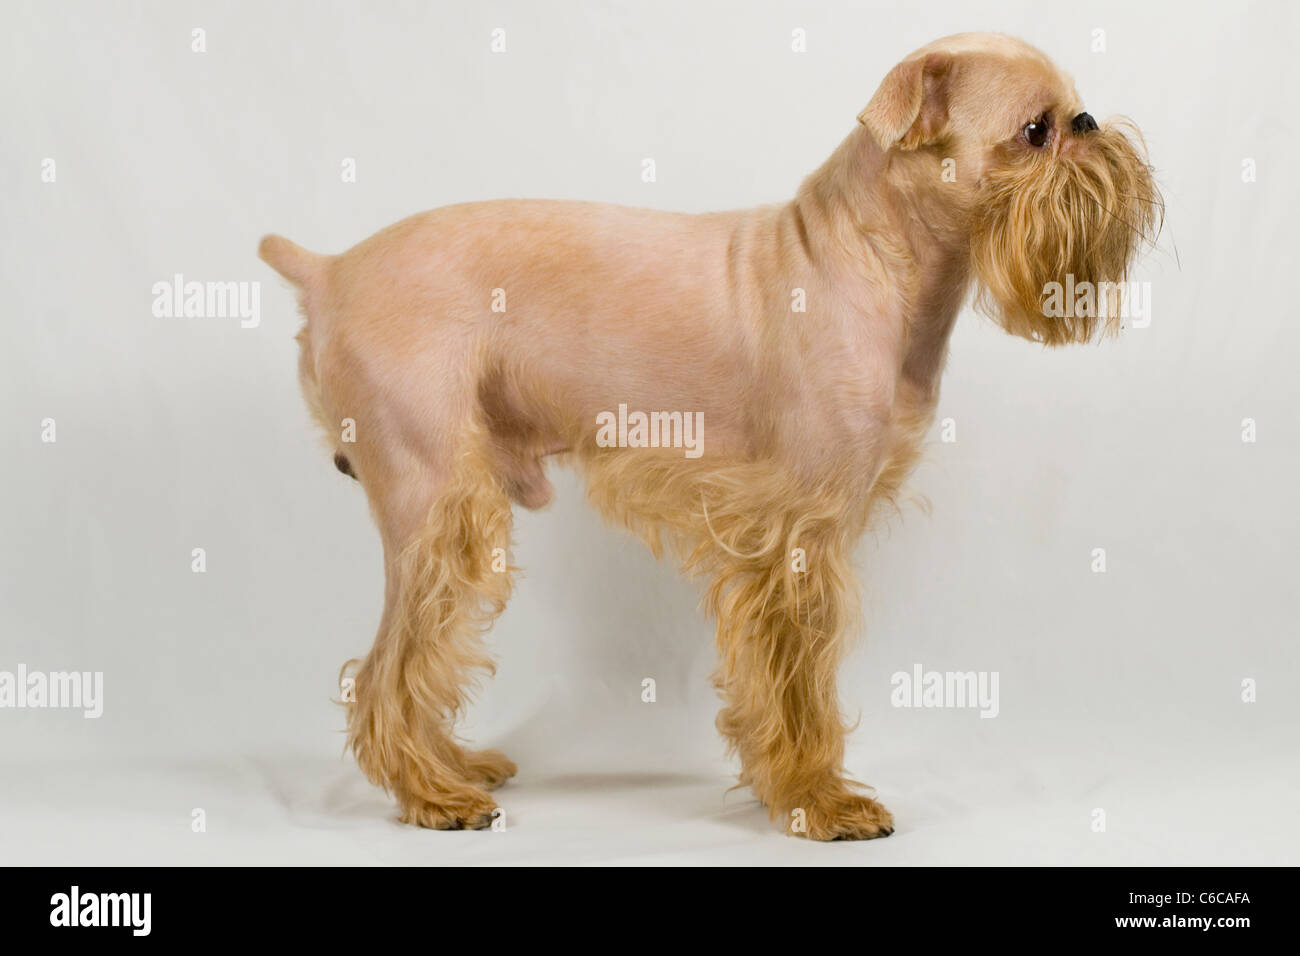 Dog of breed the Griffon Bruxellois after grooming Stock Photo